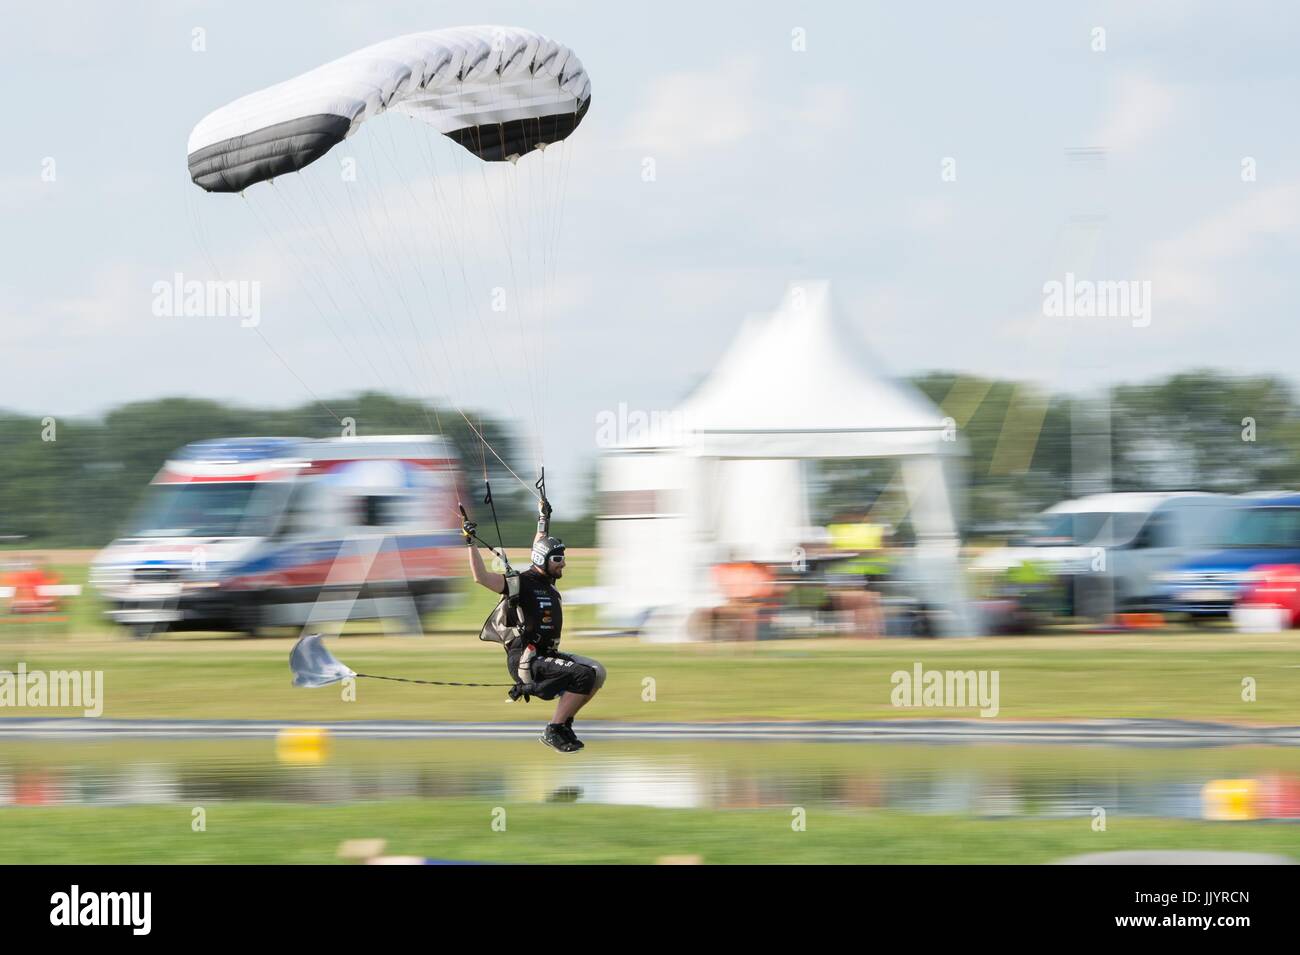 Wroclaw, Poland. 21st July, 2017. The World Games, an international multi-sport event is hold on July 20 in Wroclaw, Poland In the picture: Parachuting Credit: East News sp. z o.o./Alamy Live News Stock Photo